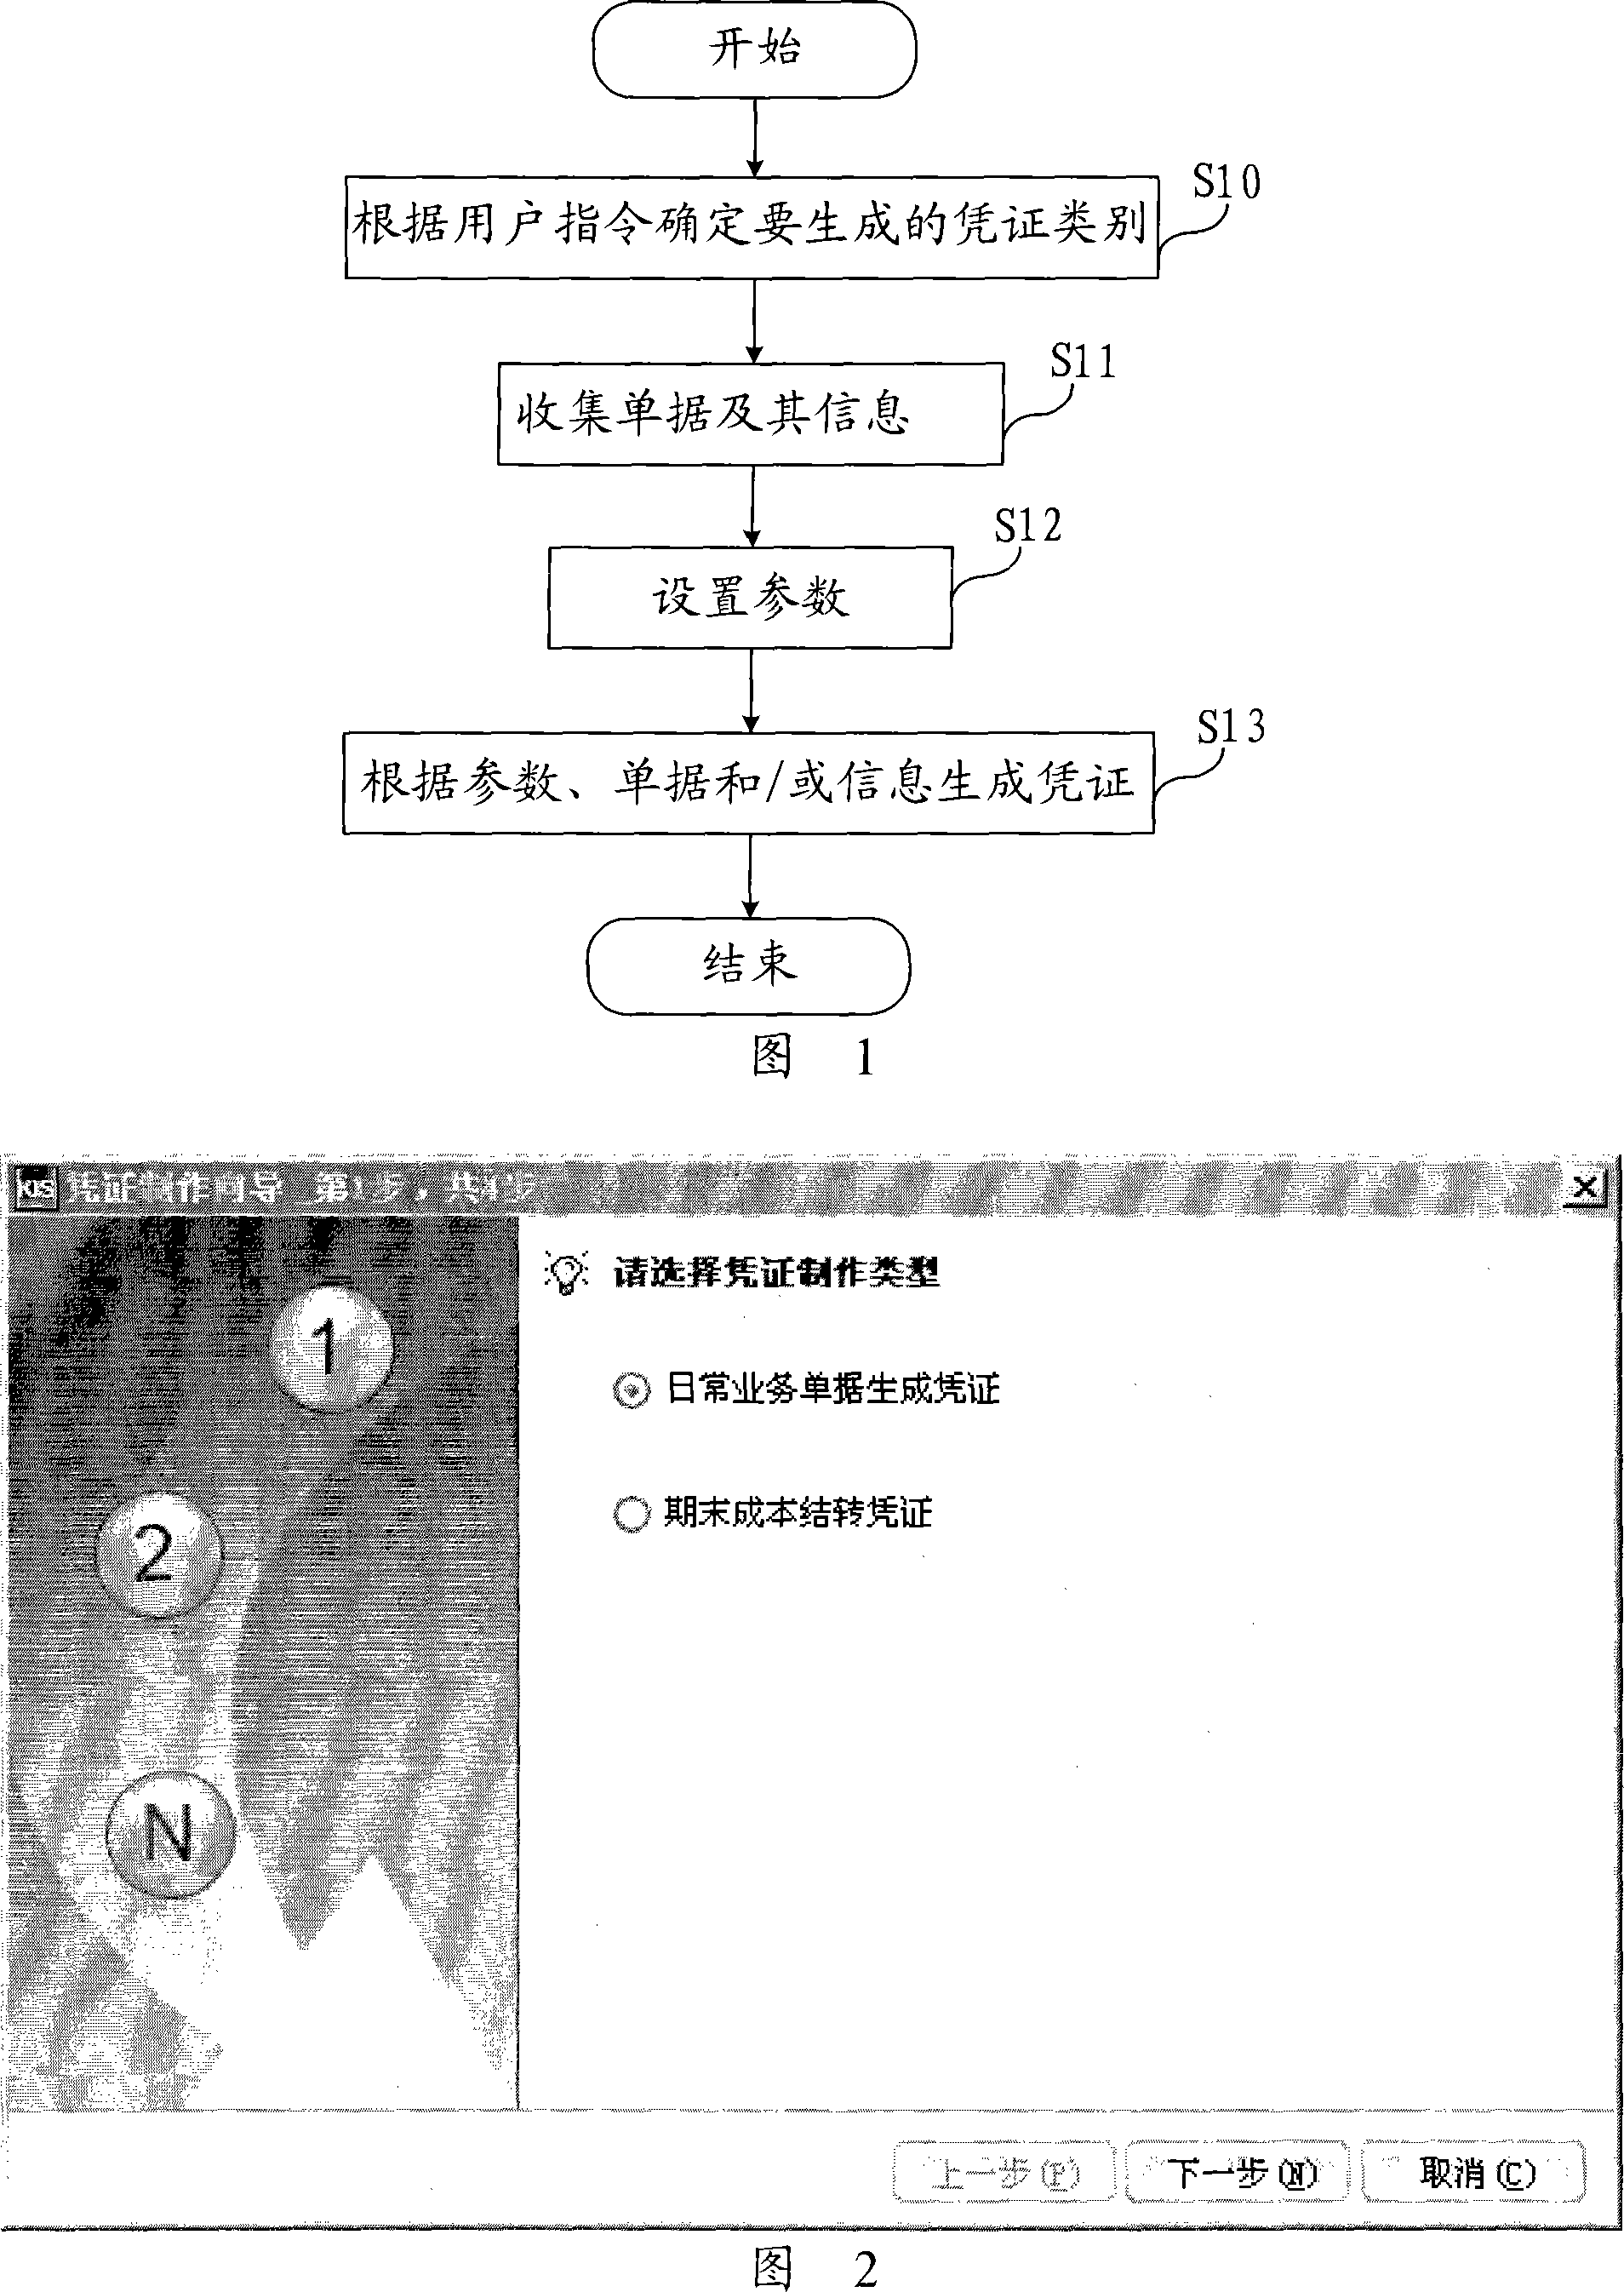 Method for generating credence according to document